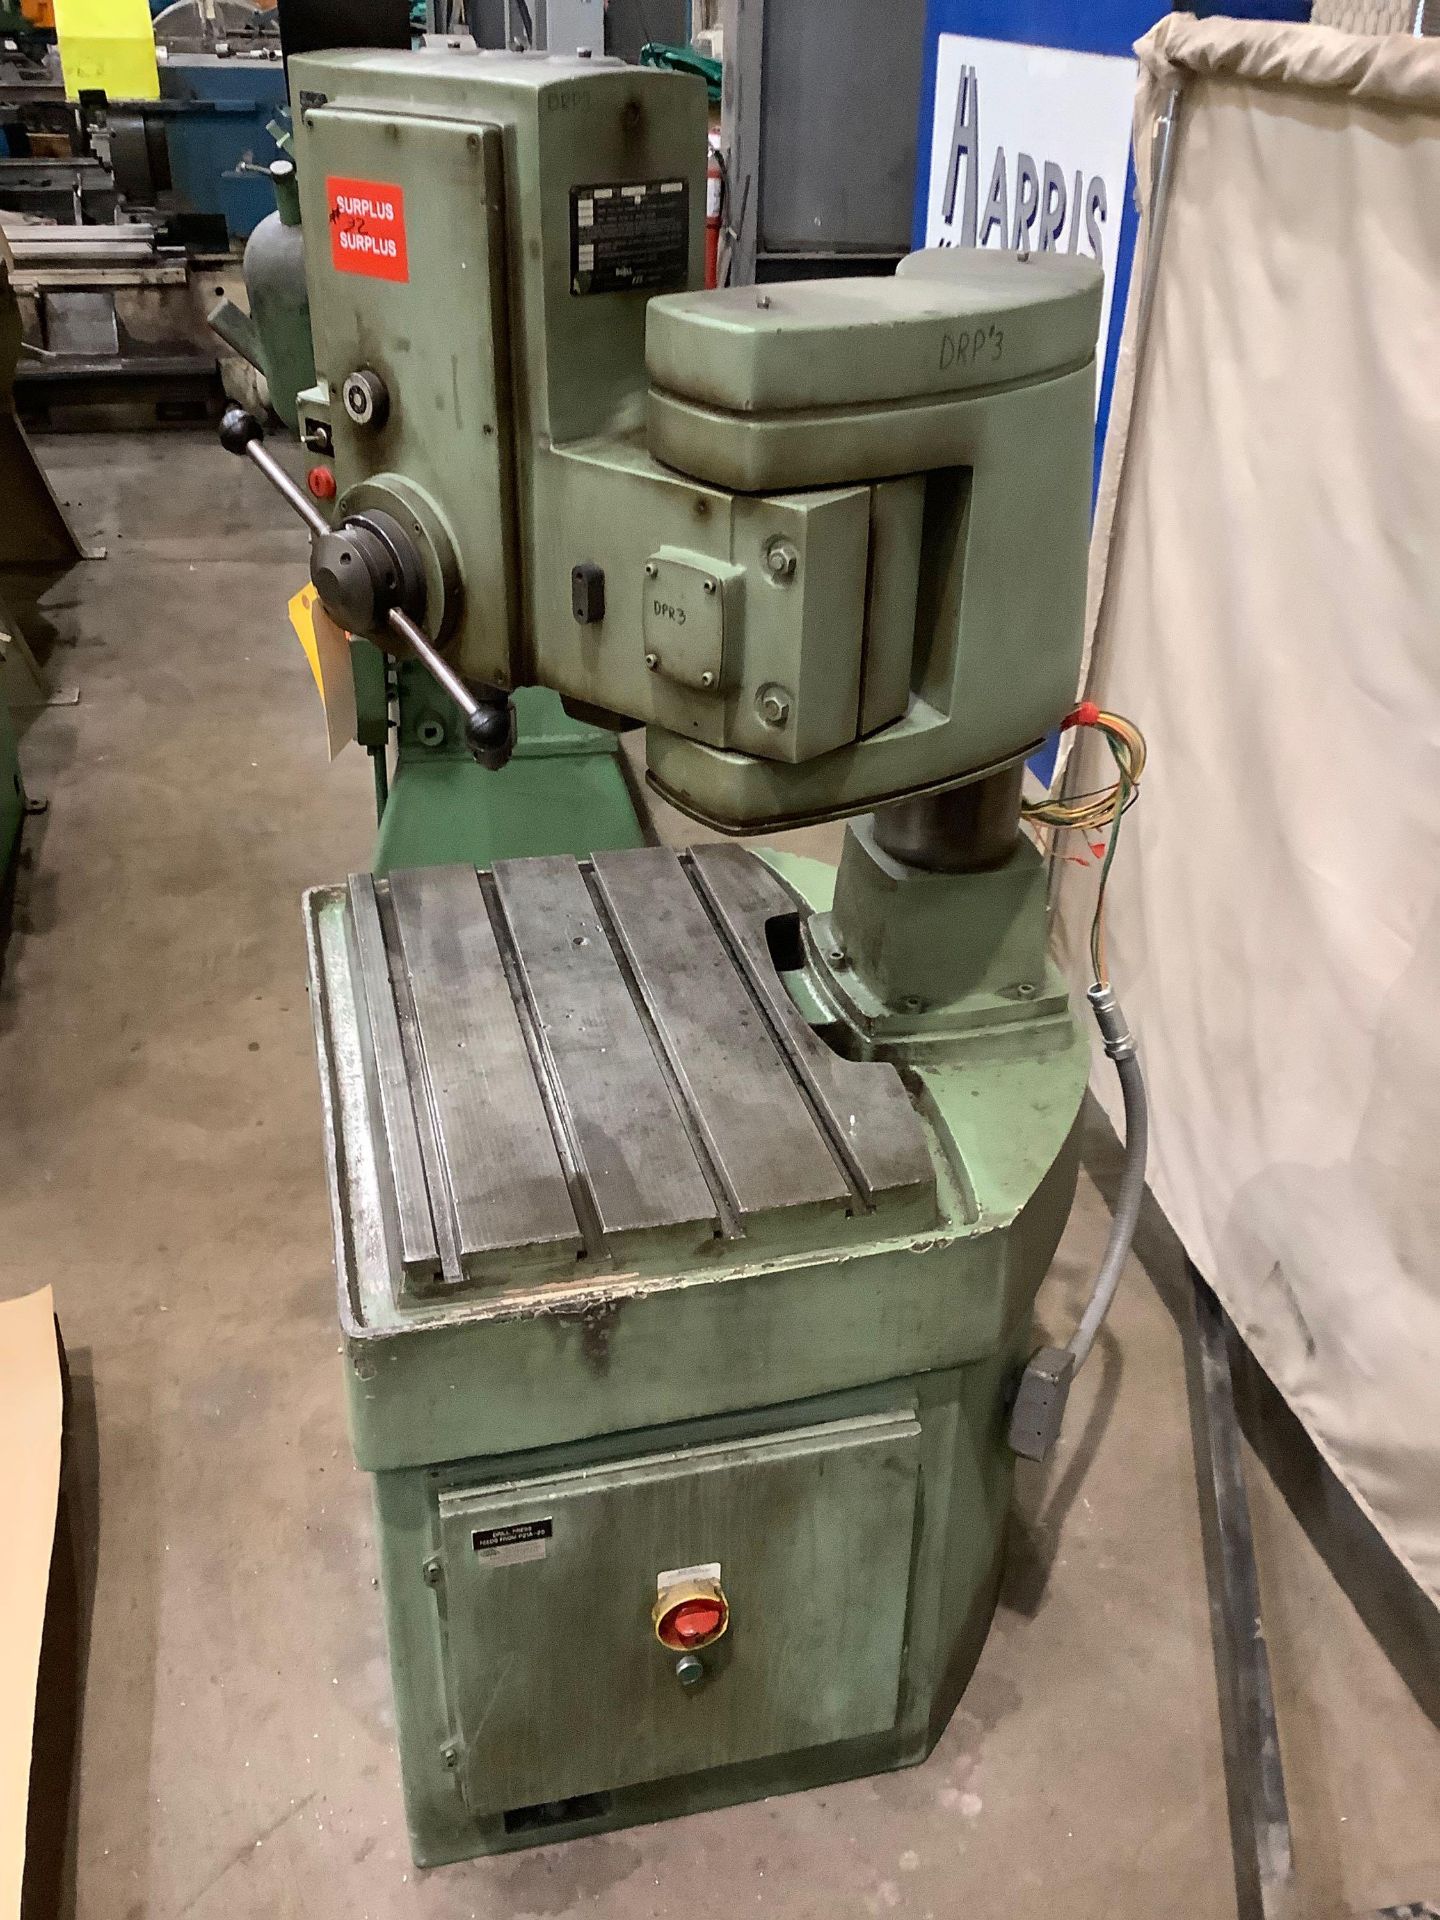 DoALL Model DTR-28 Articulating Arm Radial Drill Press - Image 4 of 7